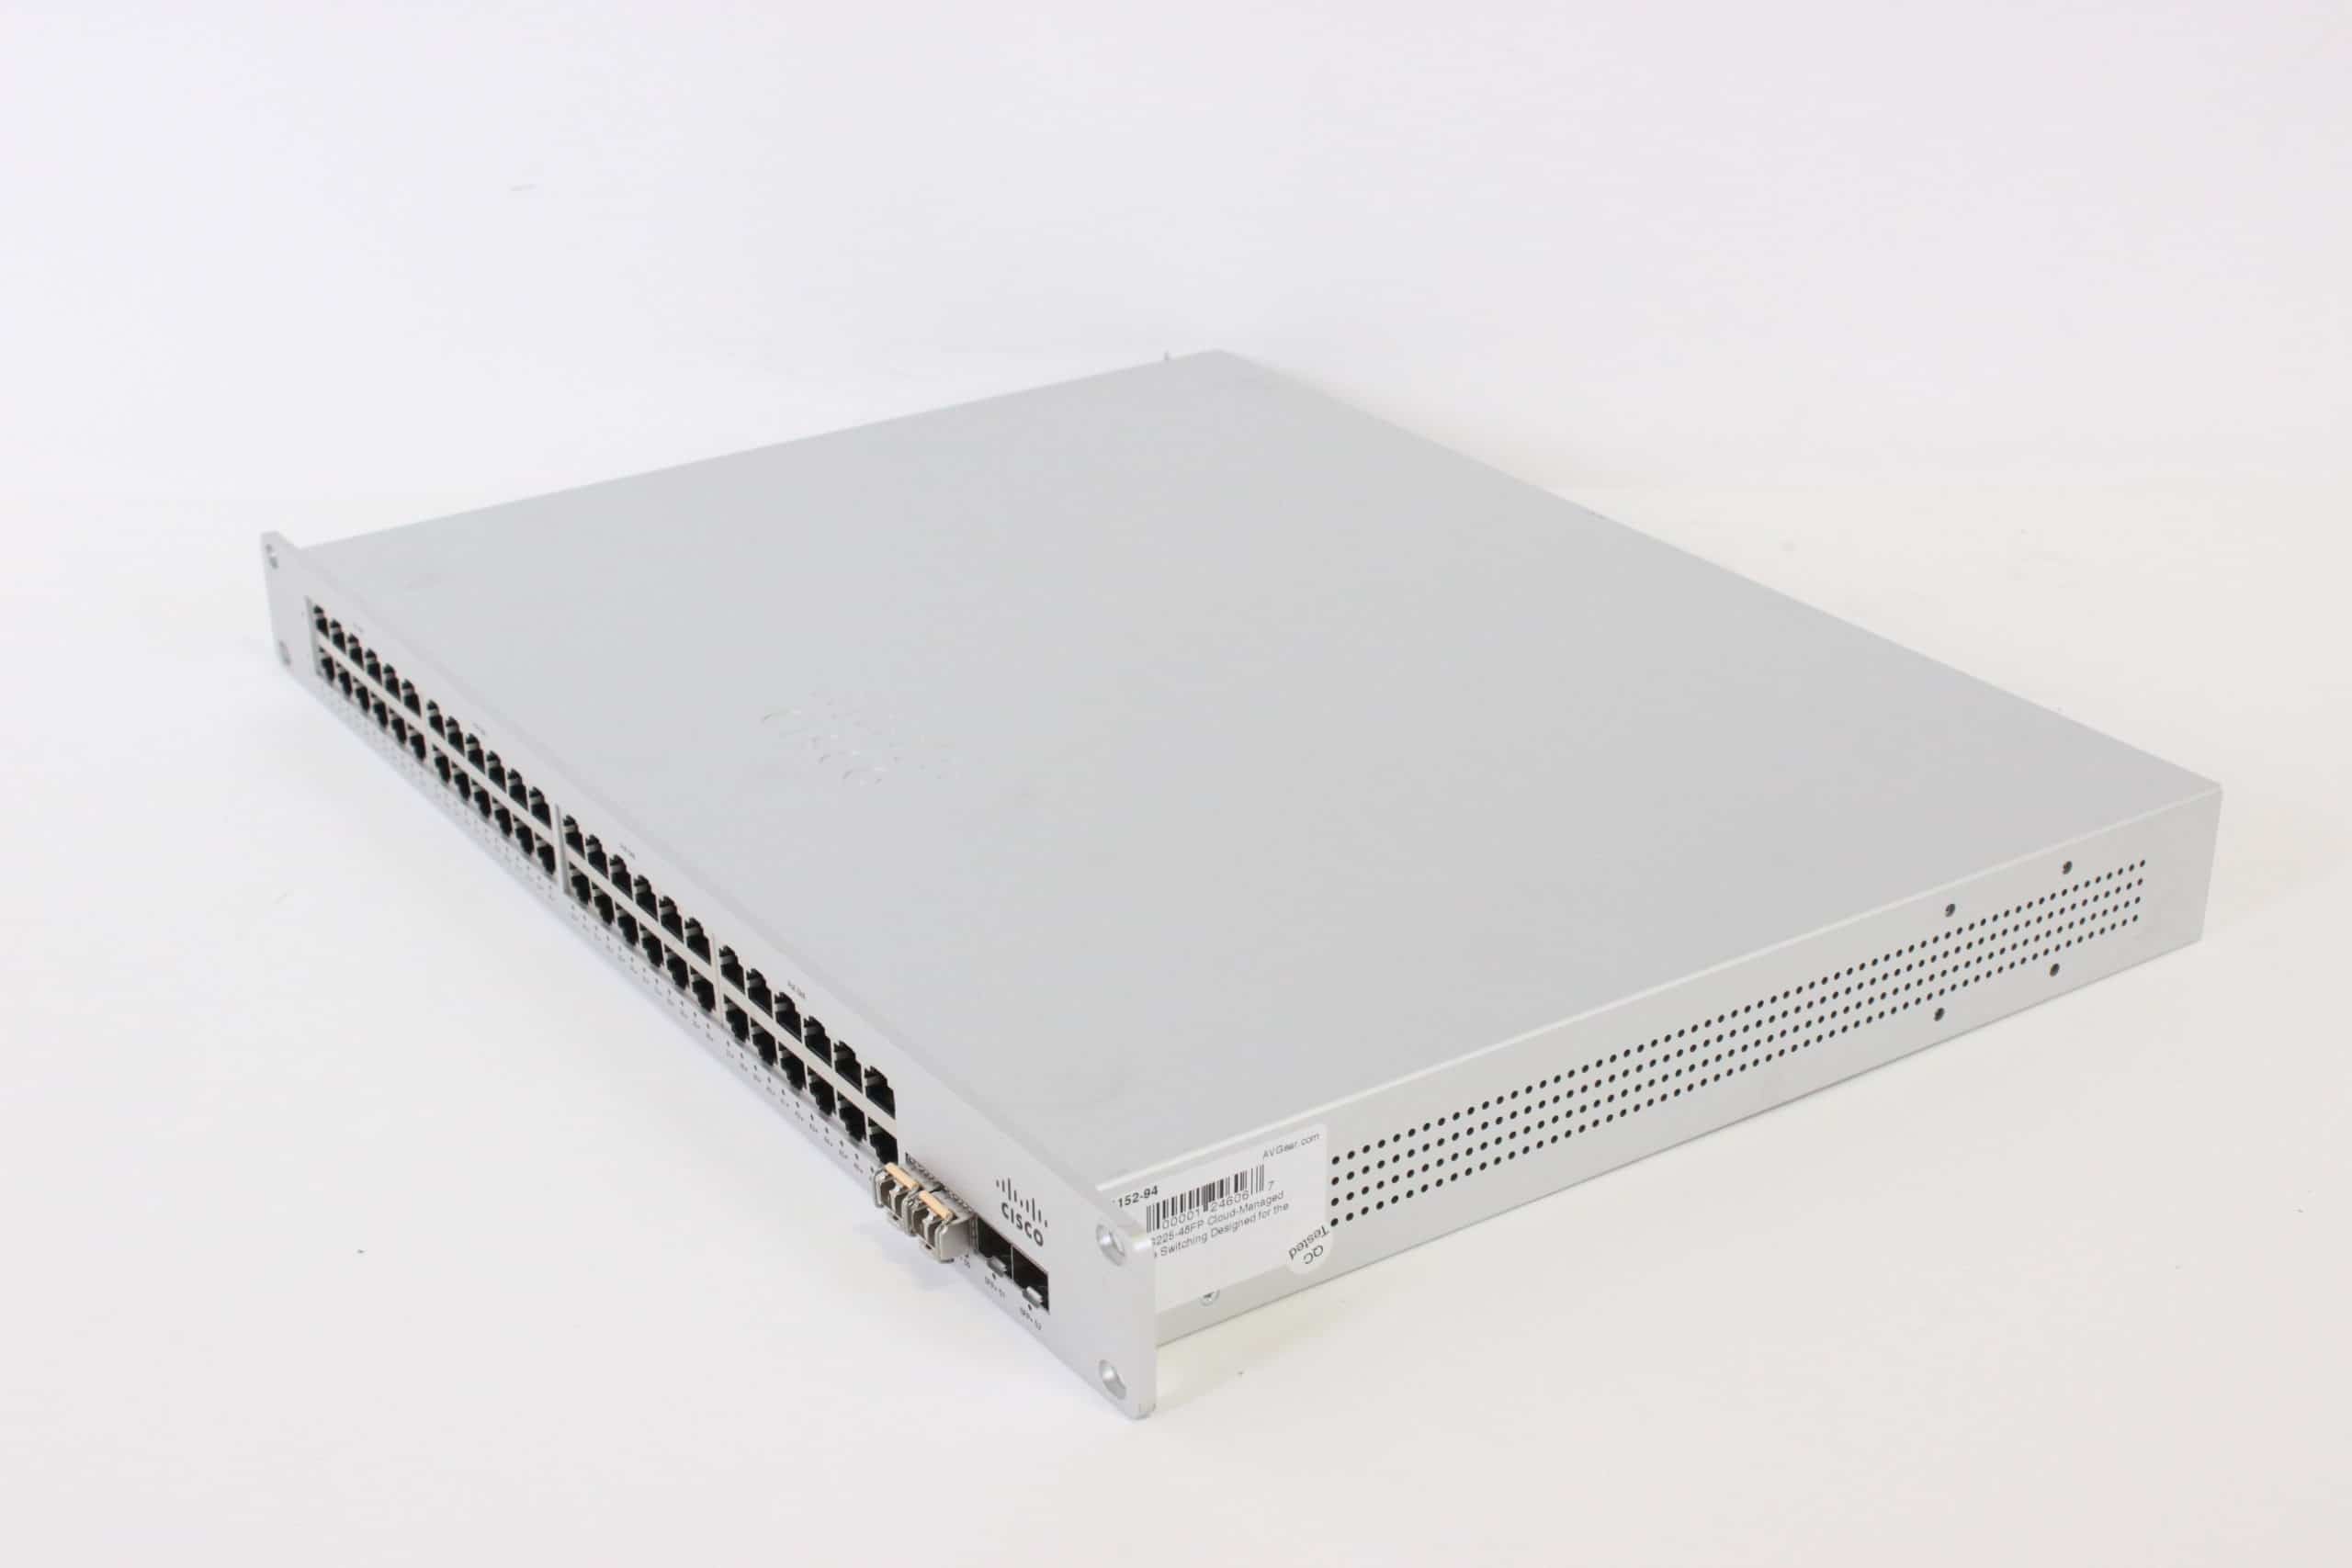 Cisco MS225-48FP Cloud-Managed Stackable Switching Designed for